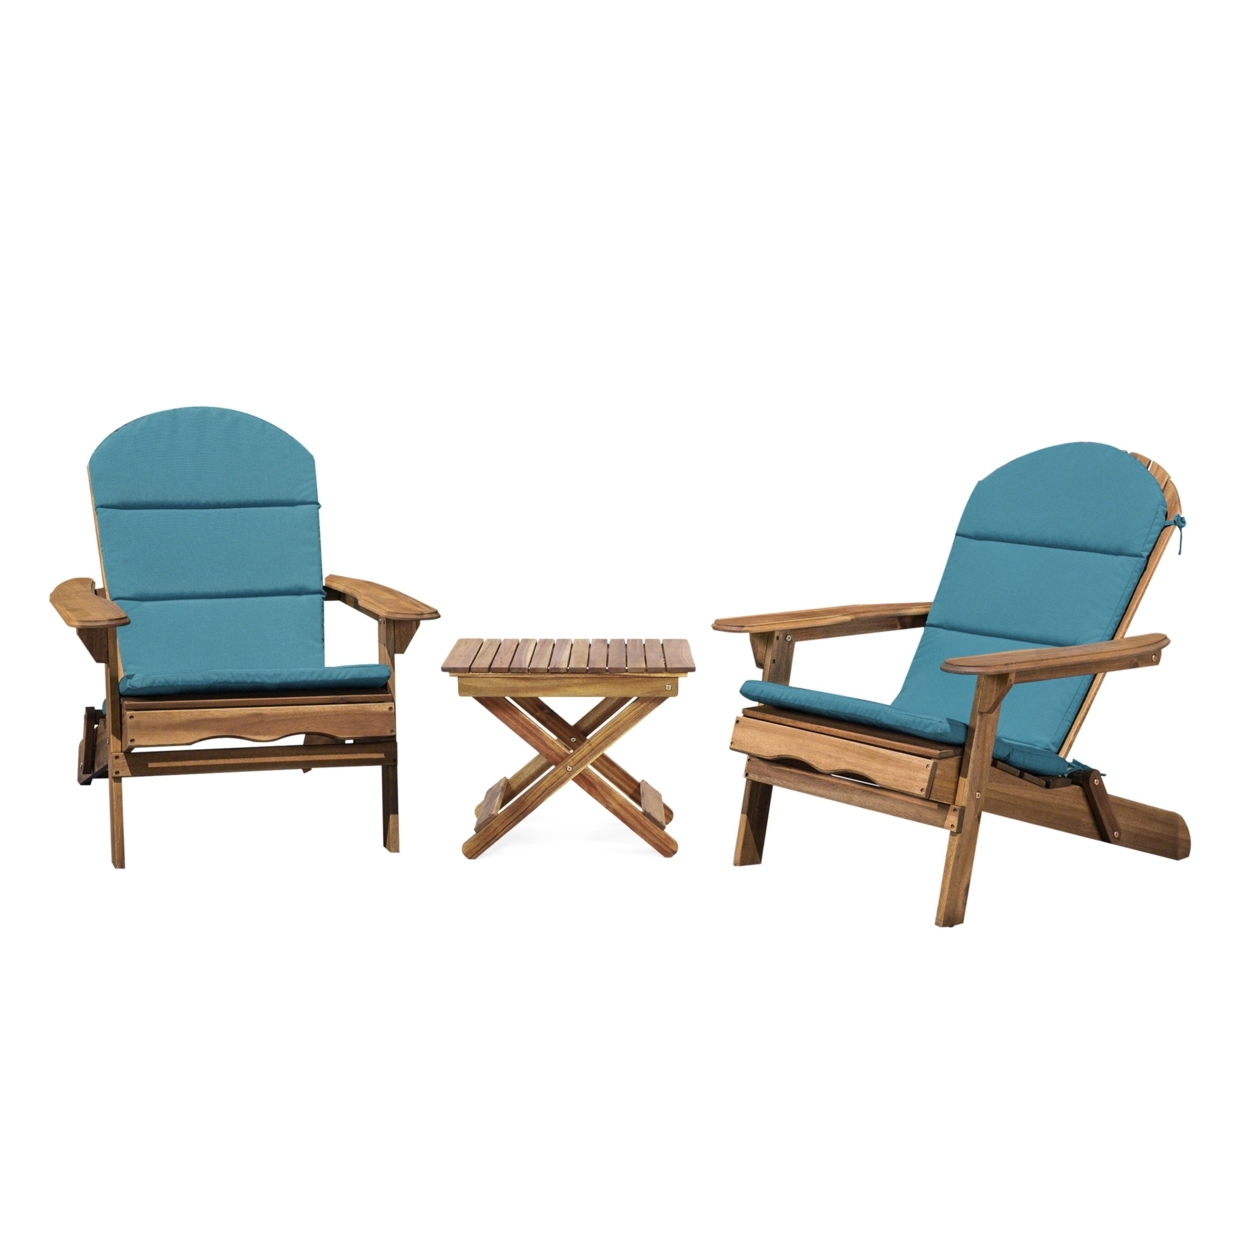 Reed Outdoor 2 Seater Acacia Wood Chat Set With Water Resistant Cushions - Dark Gray/dark Teal